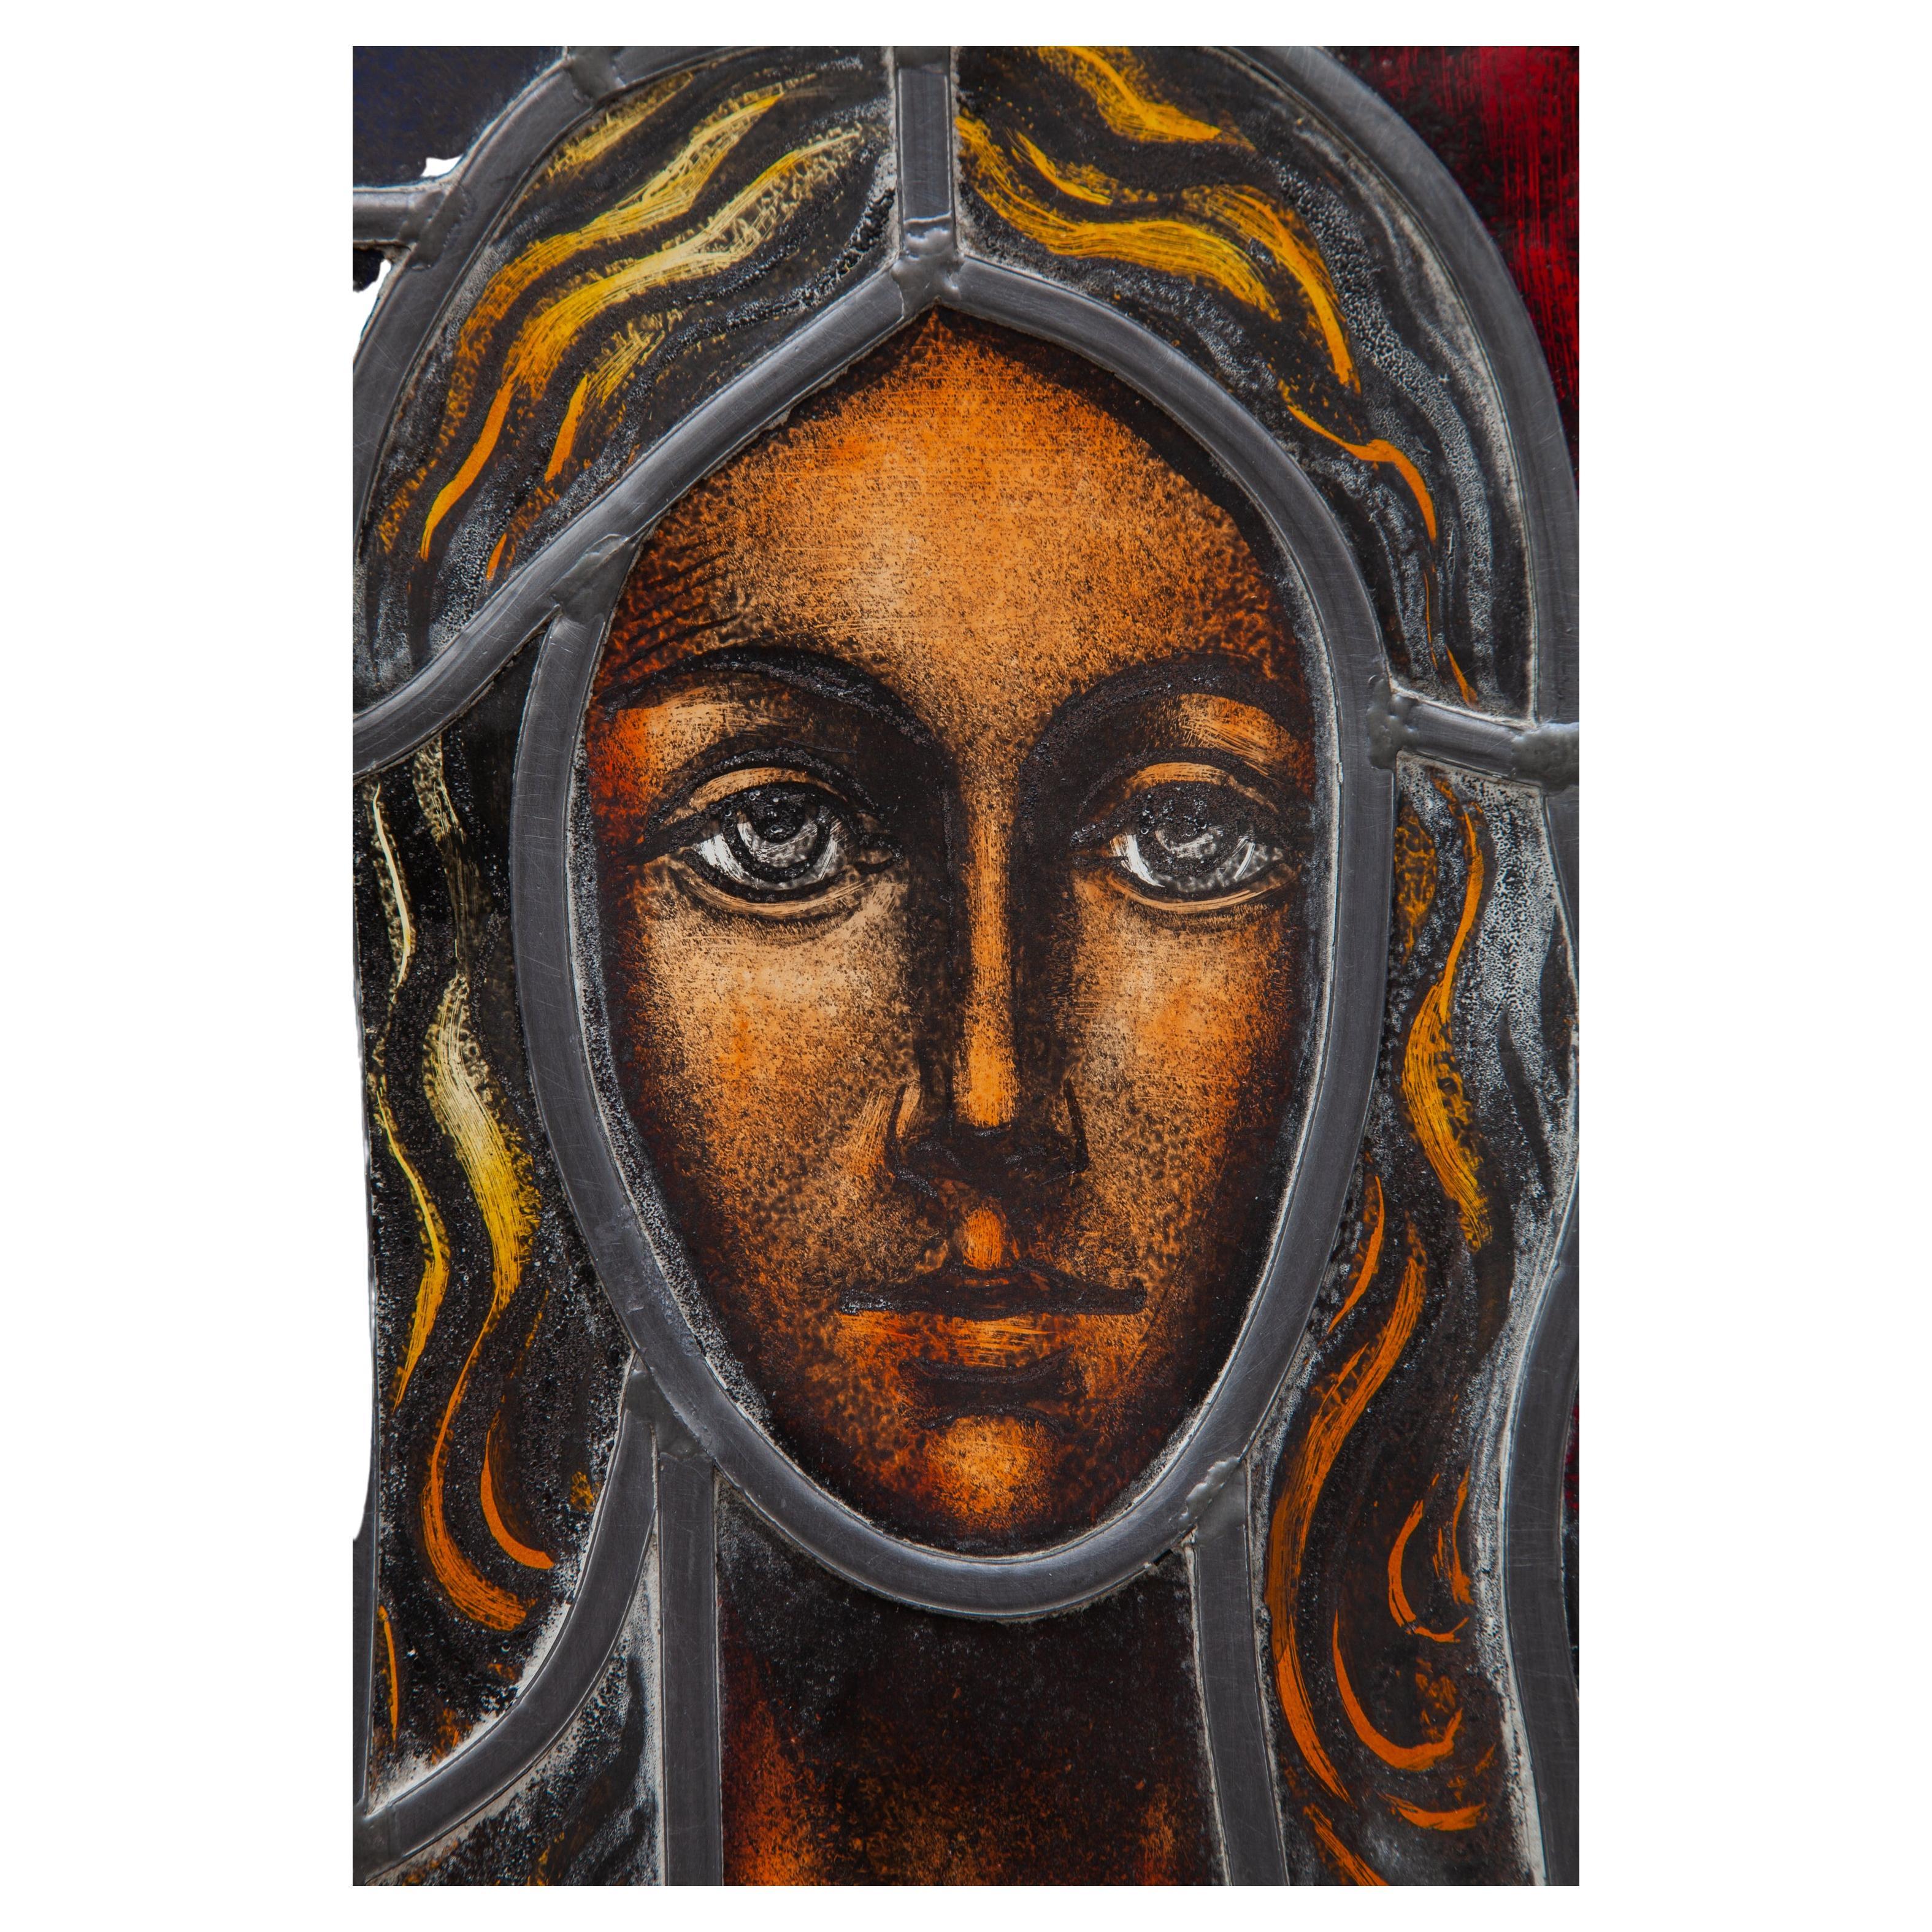 A beautiful woman portrait in the glass closed. A stained glass technique in glass gives a magical atmosphere when light falls and changes the color palette intensity during the course of the day. An Antique stained glass panel. Features a depiction